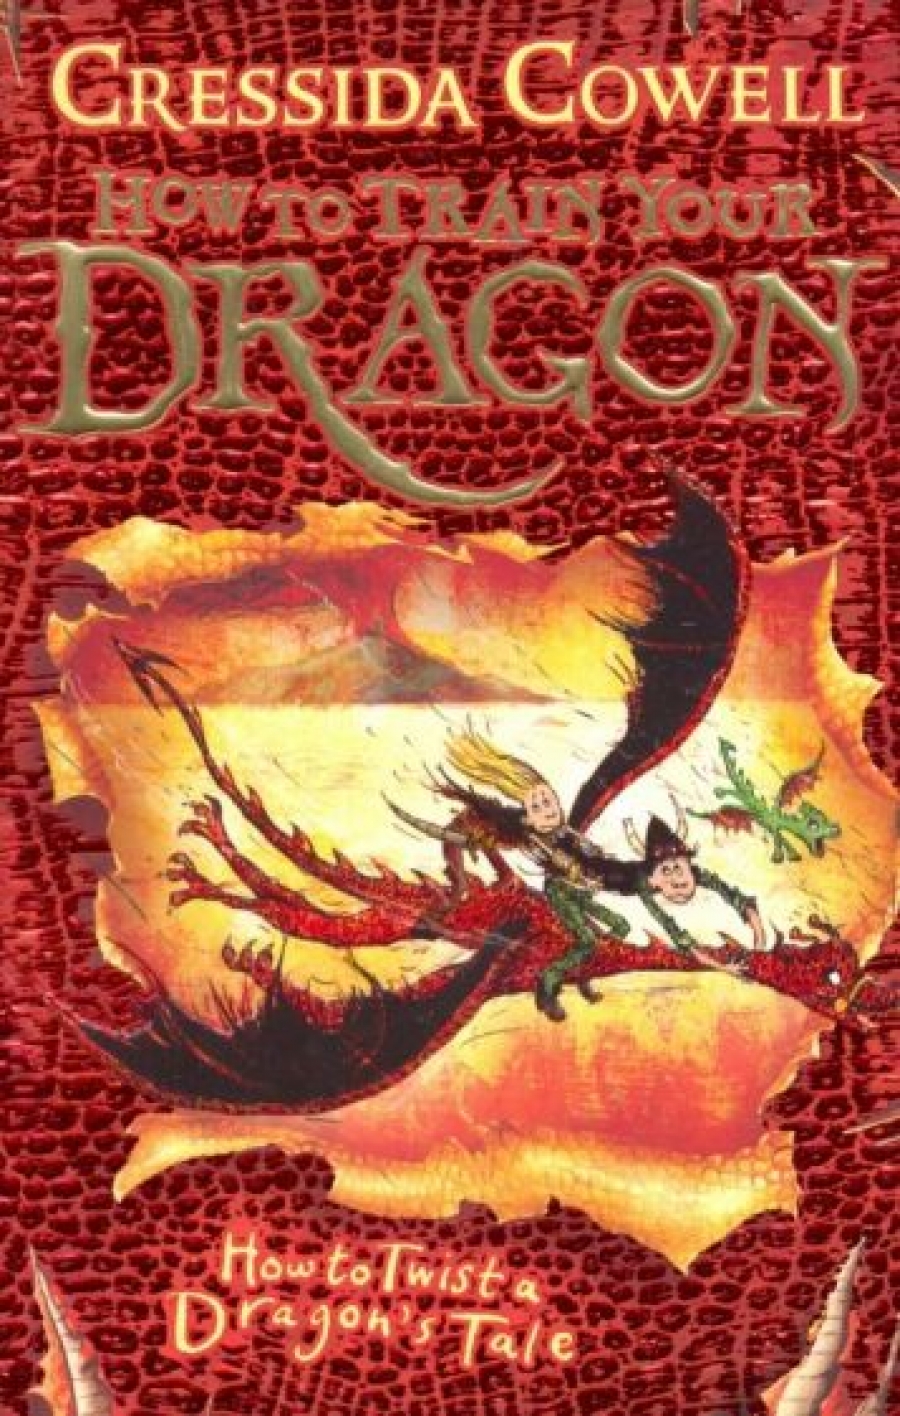 Cressida C. Hiccup: How To Twist a Dragon's Tale (New Ediiton) 